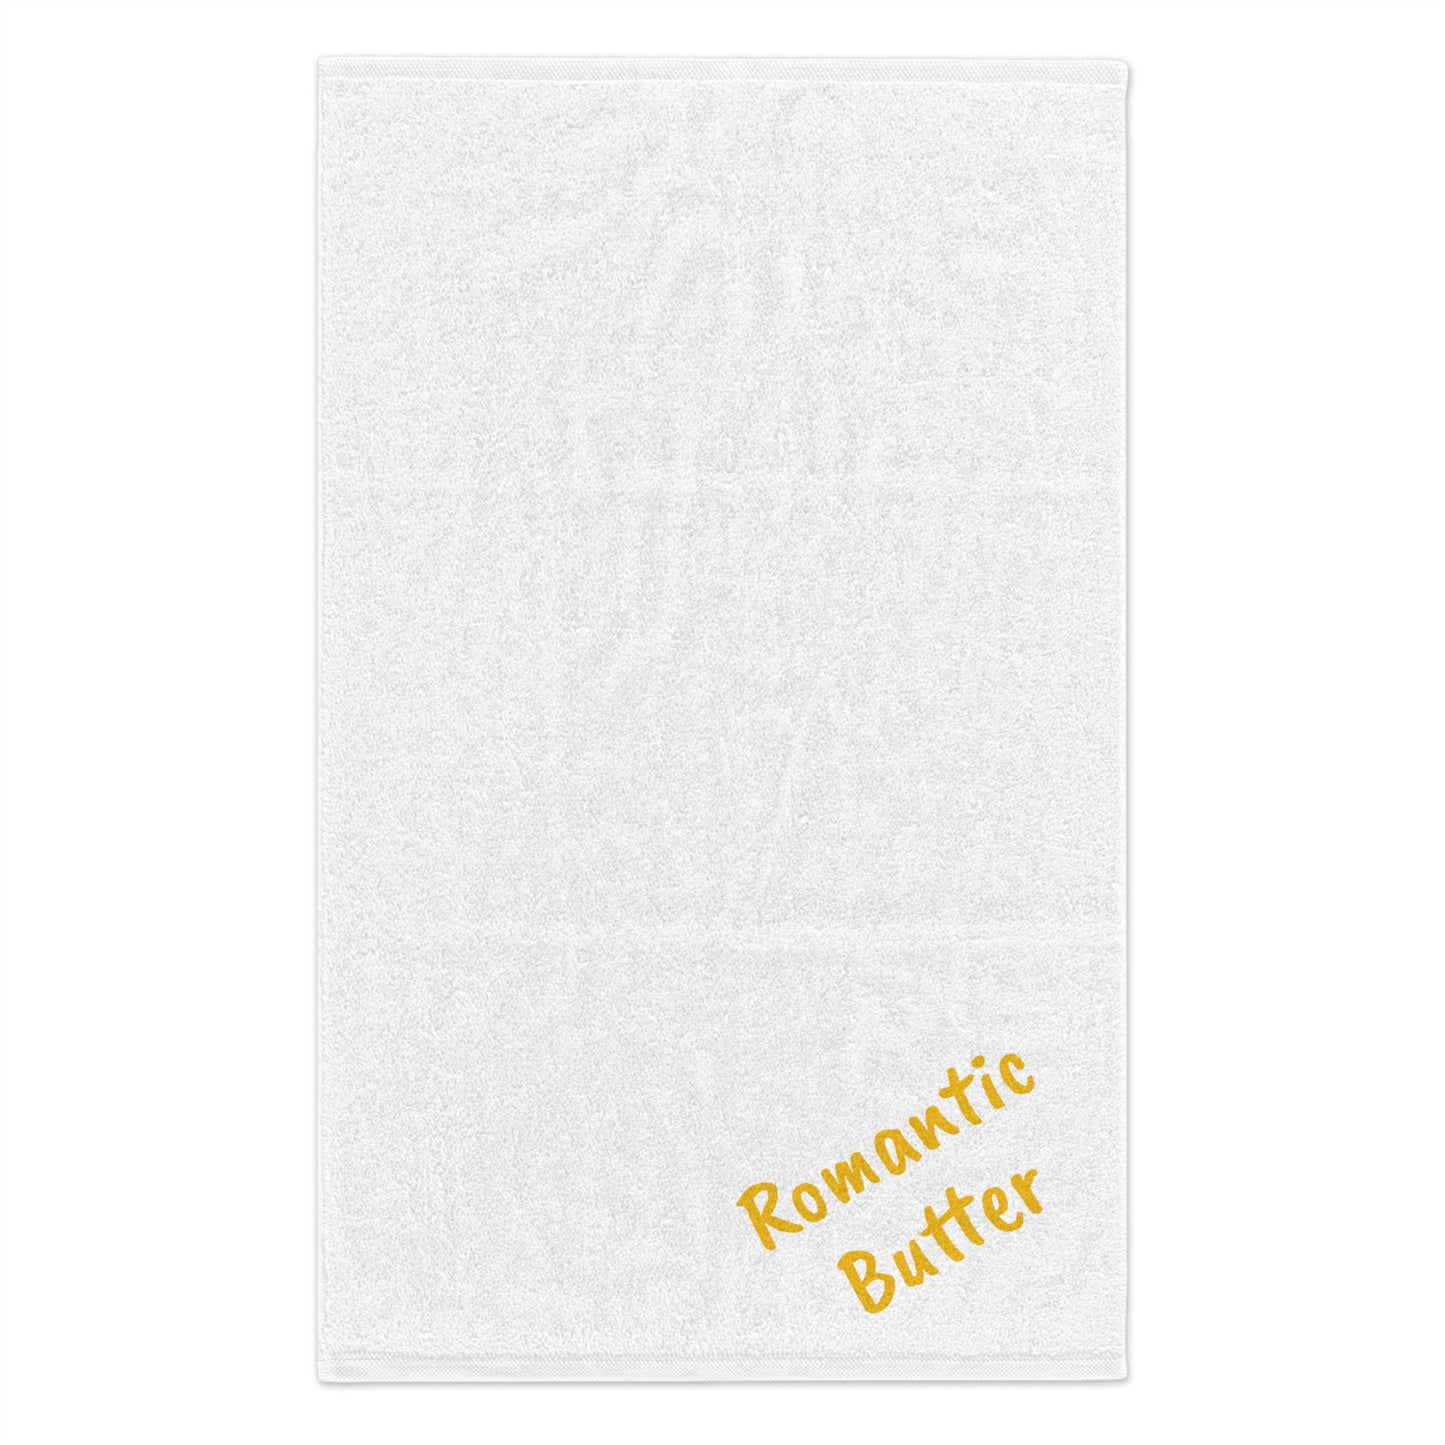 HMNS Podcast "Romantic Butter" clean up towel